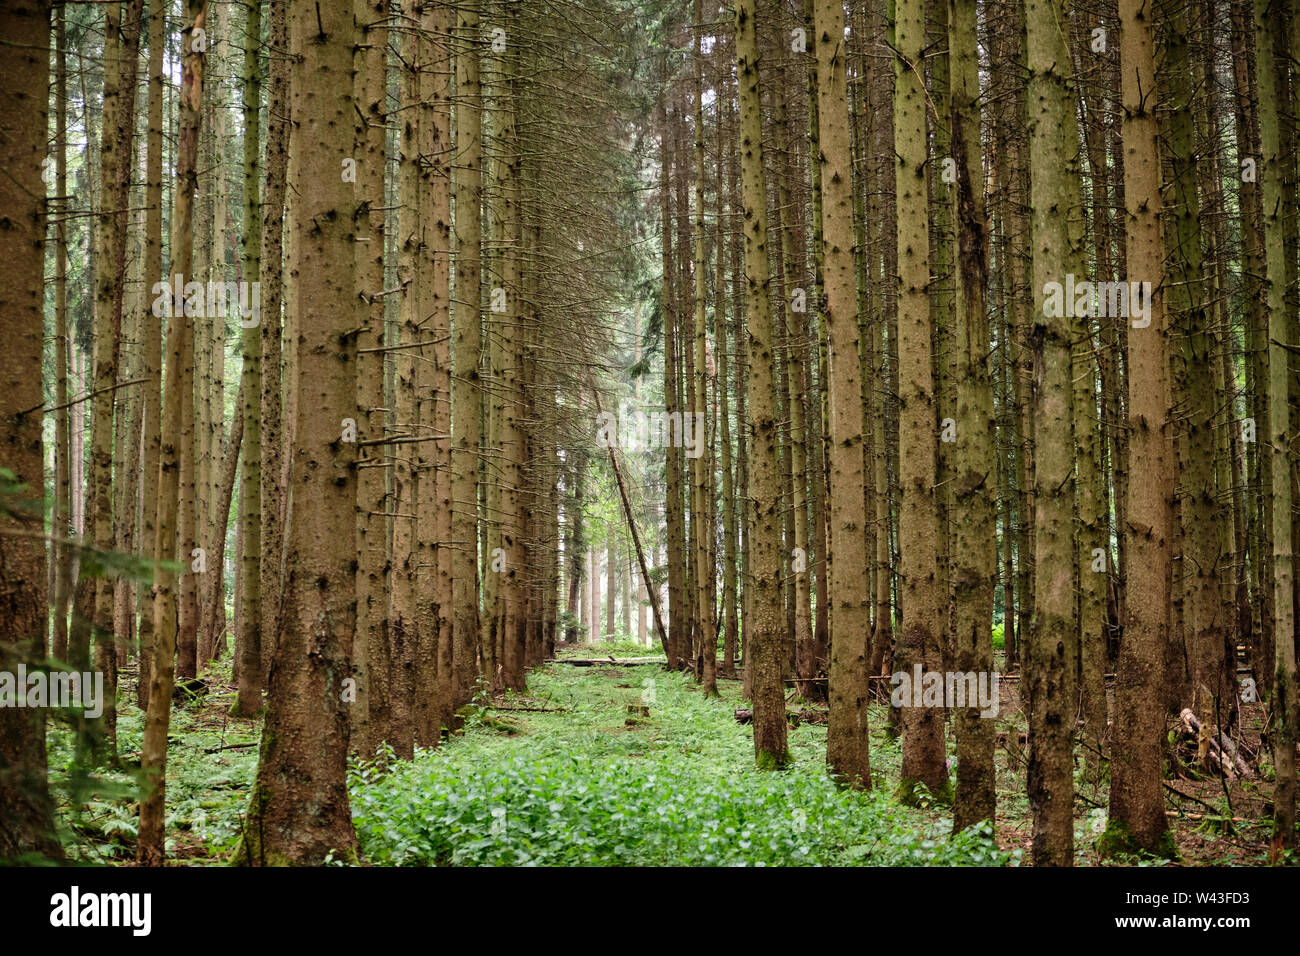 The tree trunks standing in a row in a German forest Stock Photo